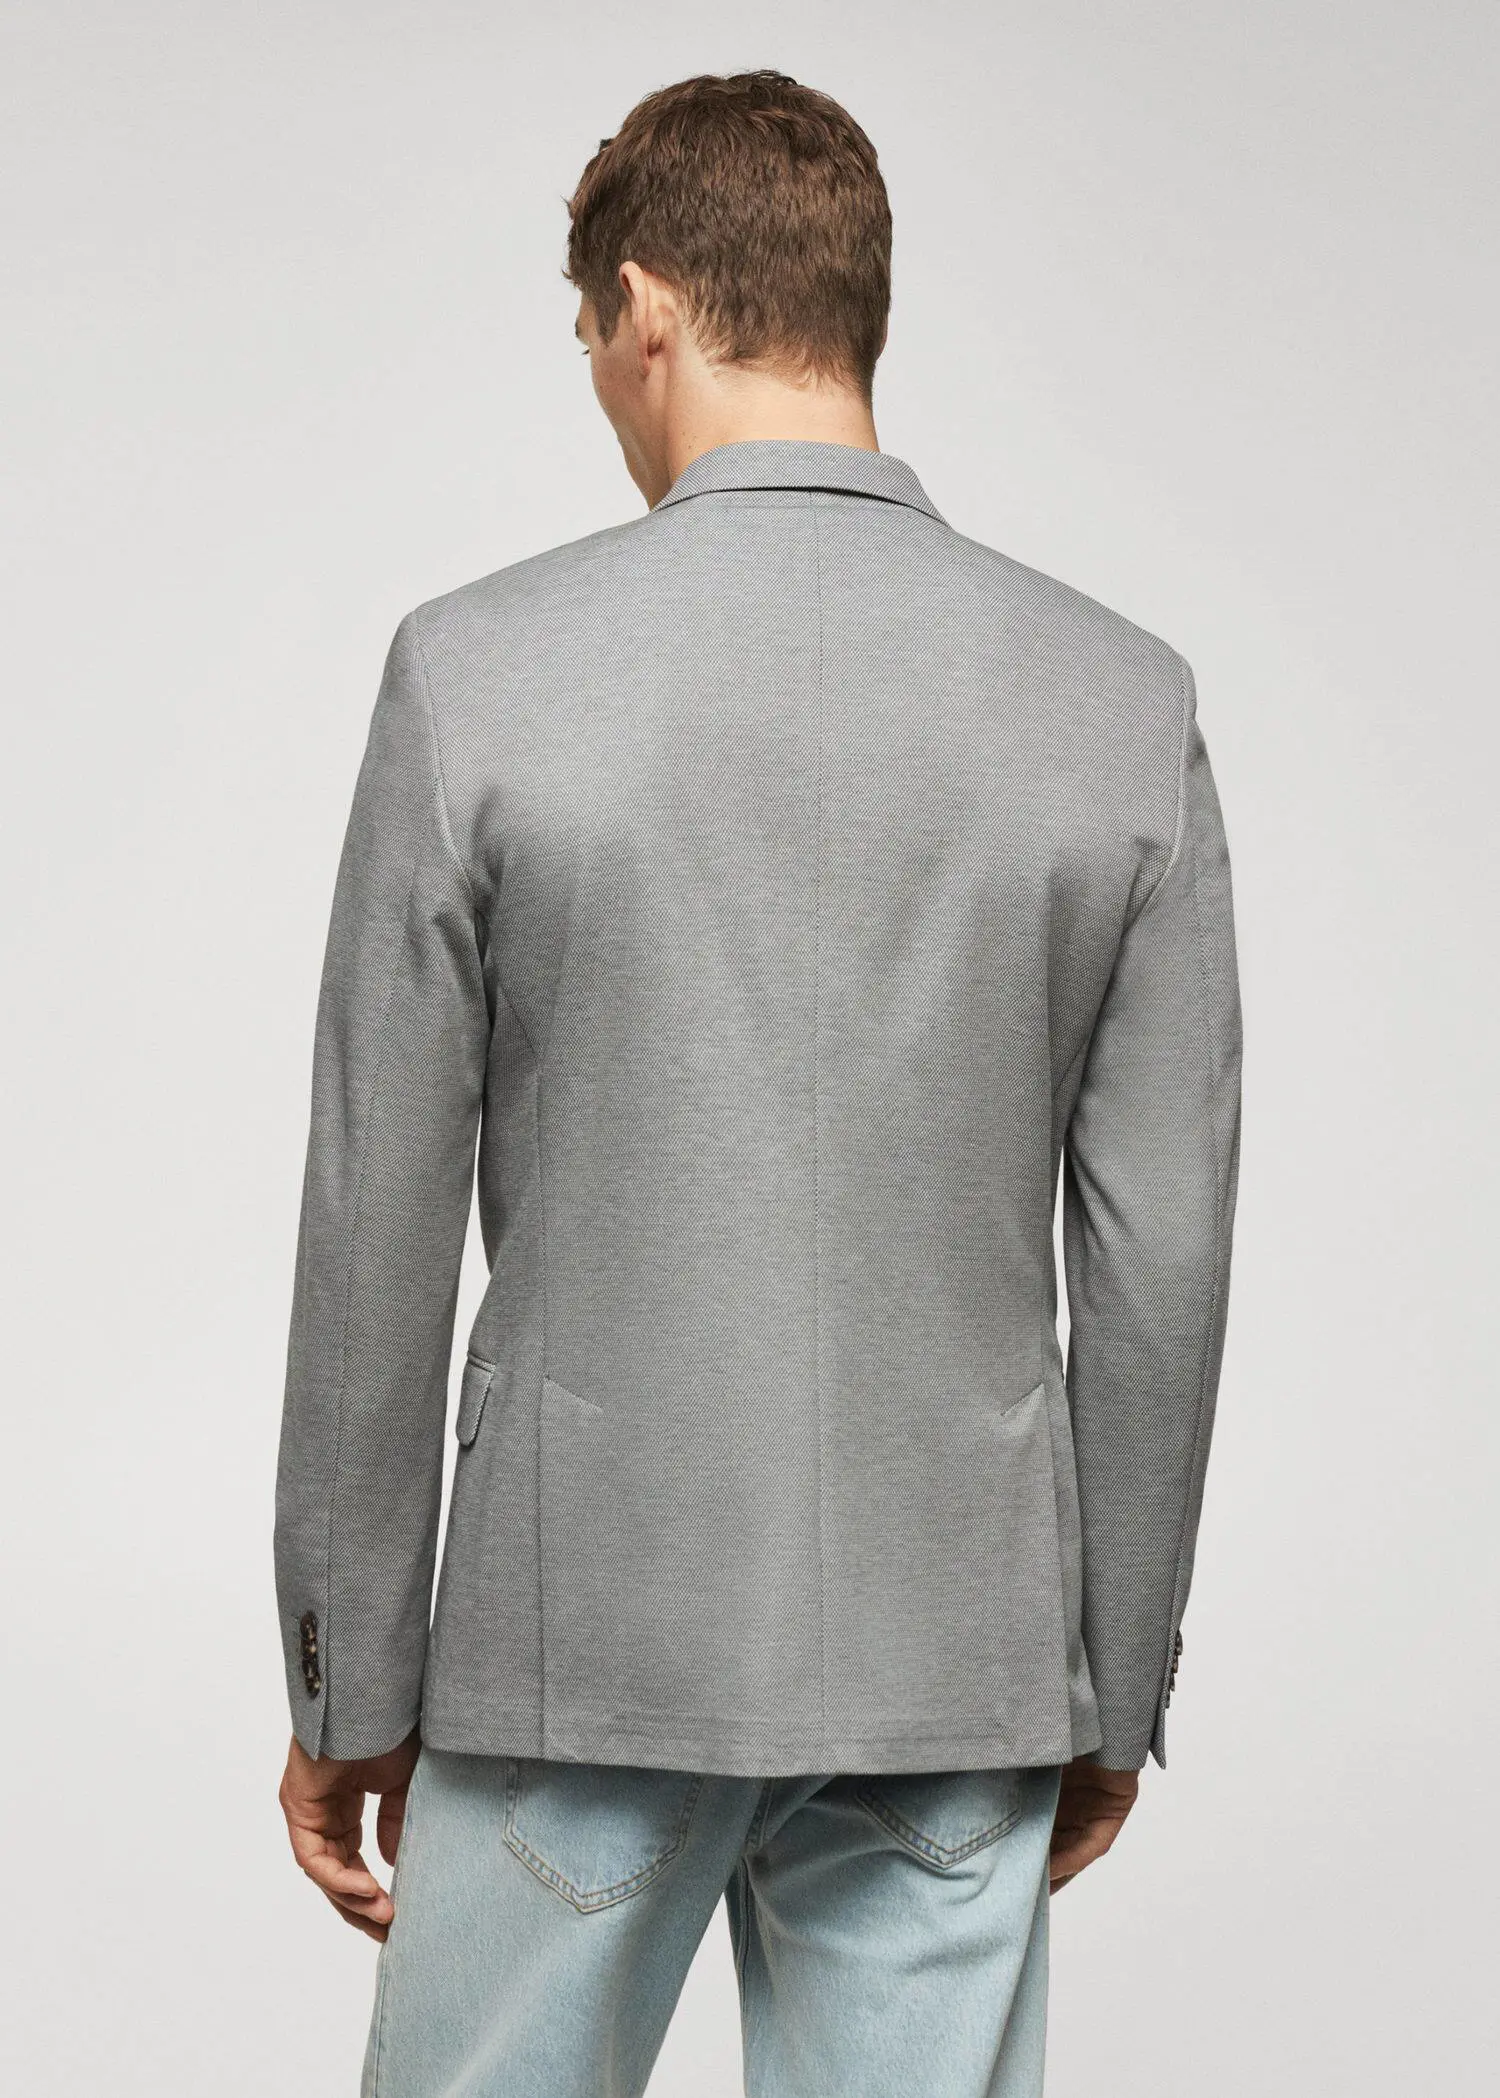 Mango Slim fit microstructure blazer. a man wearing a gray jacket and jeans. 